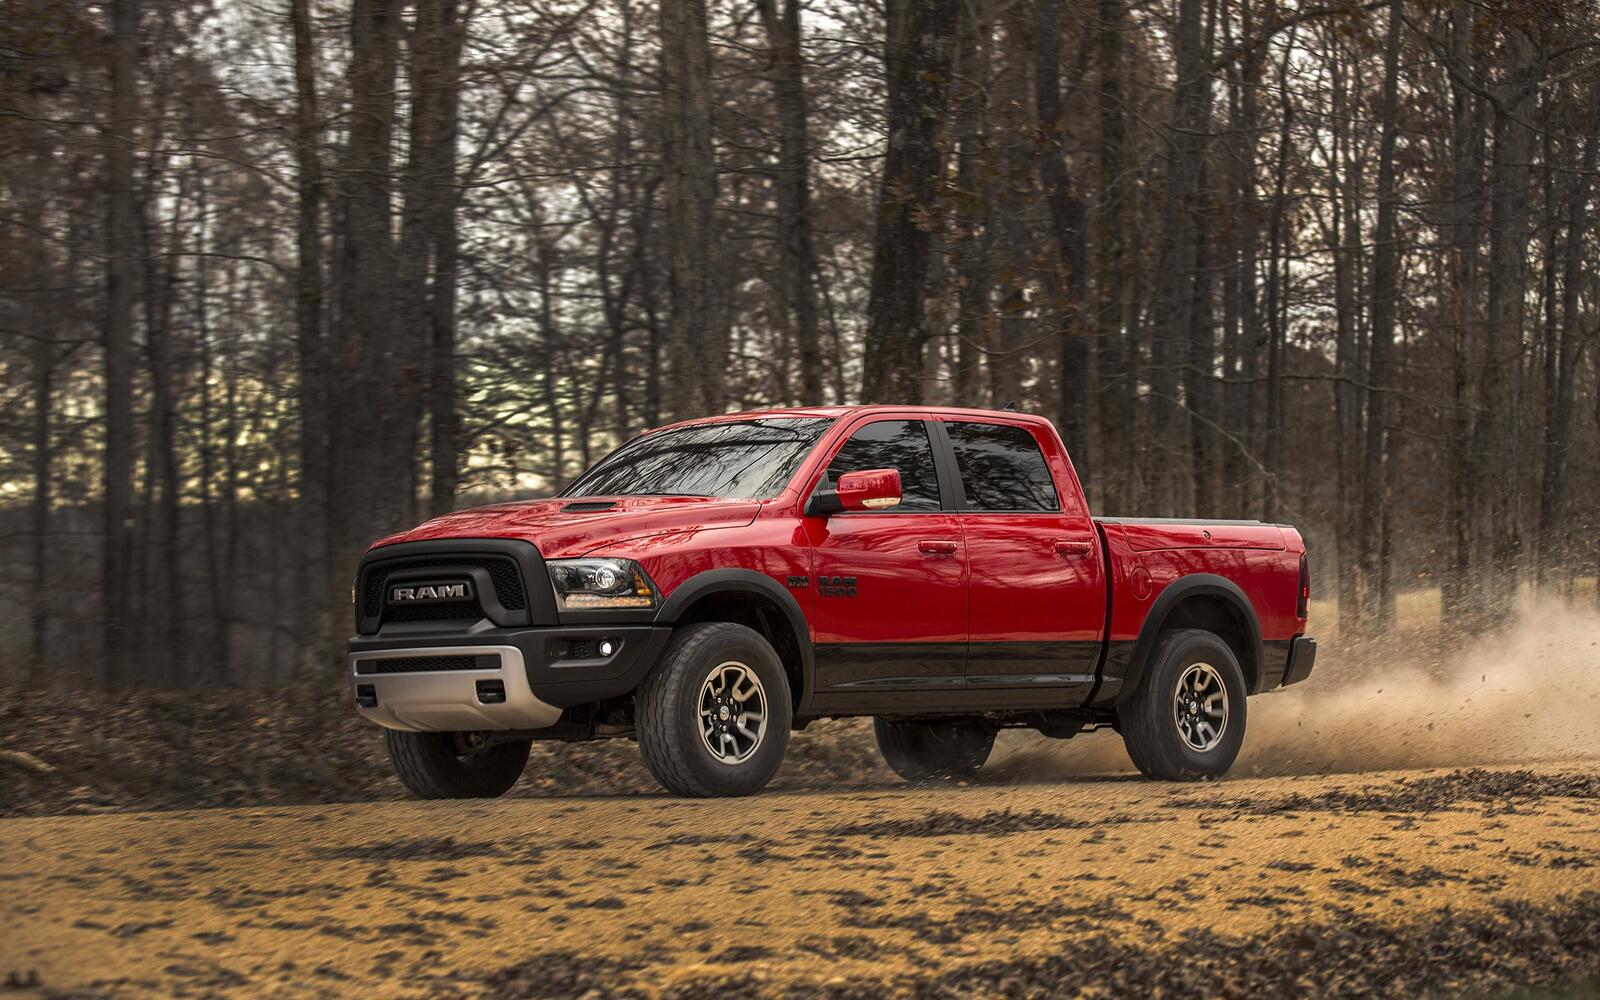 Free photo A red-colored Dodge Ram driving down a forest road